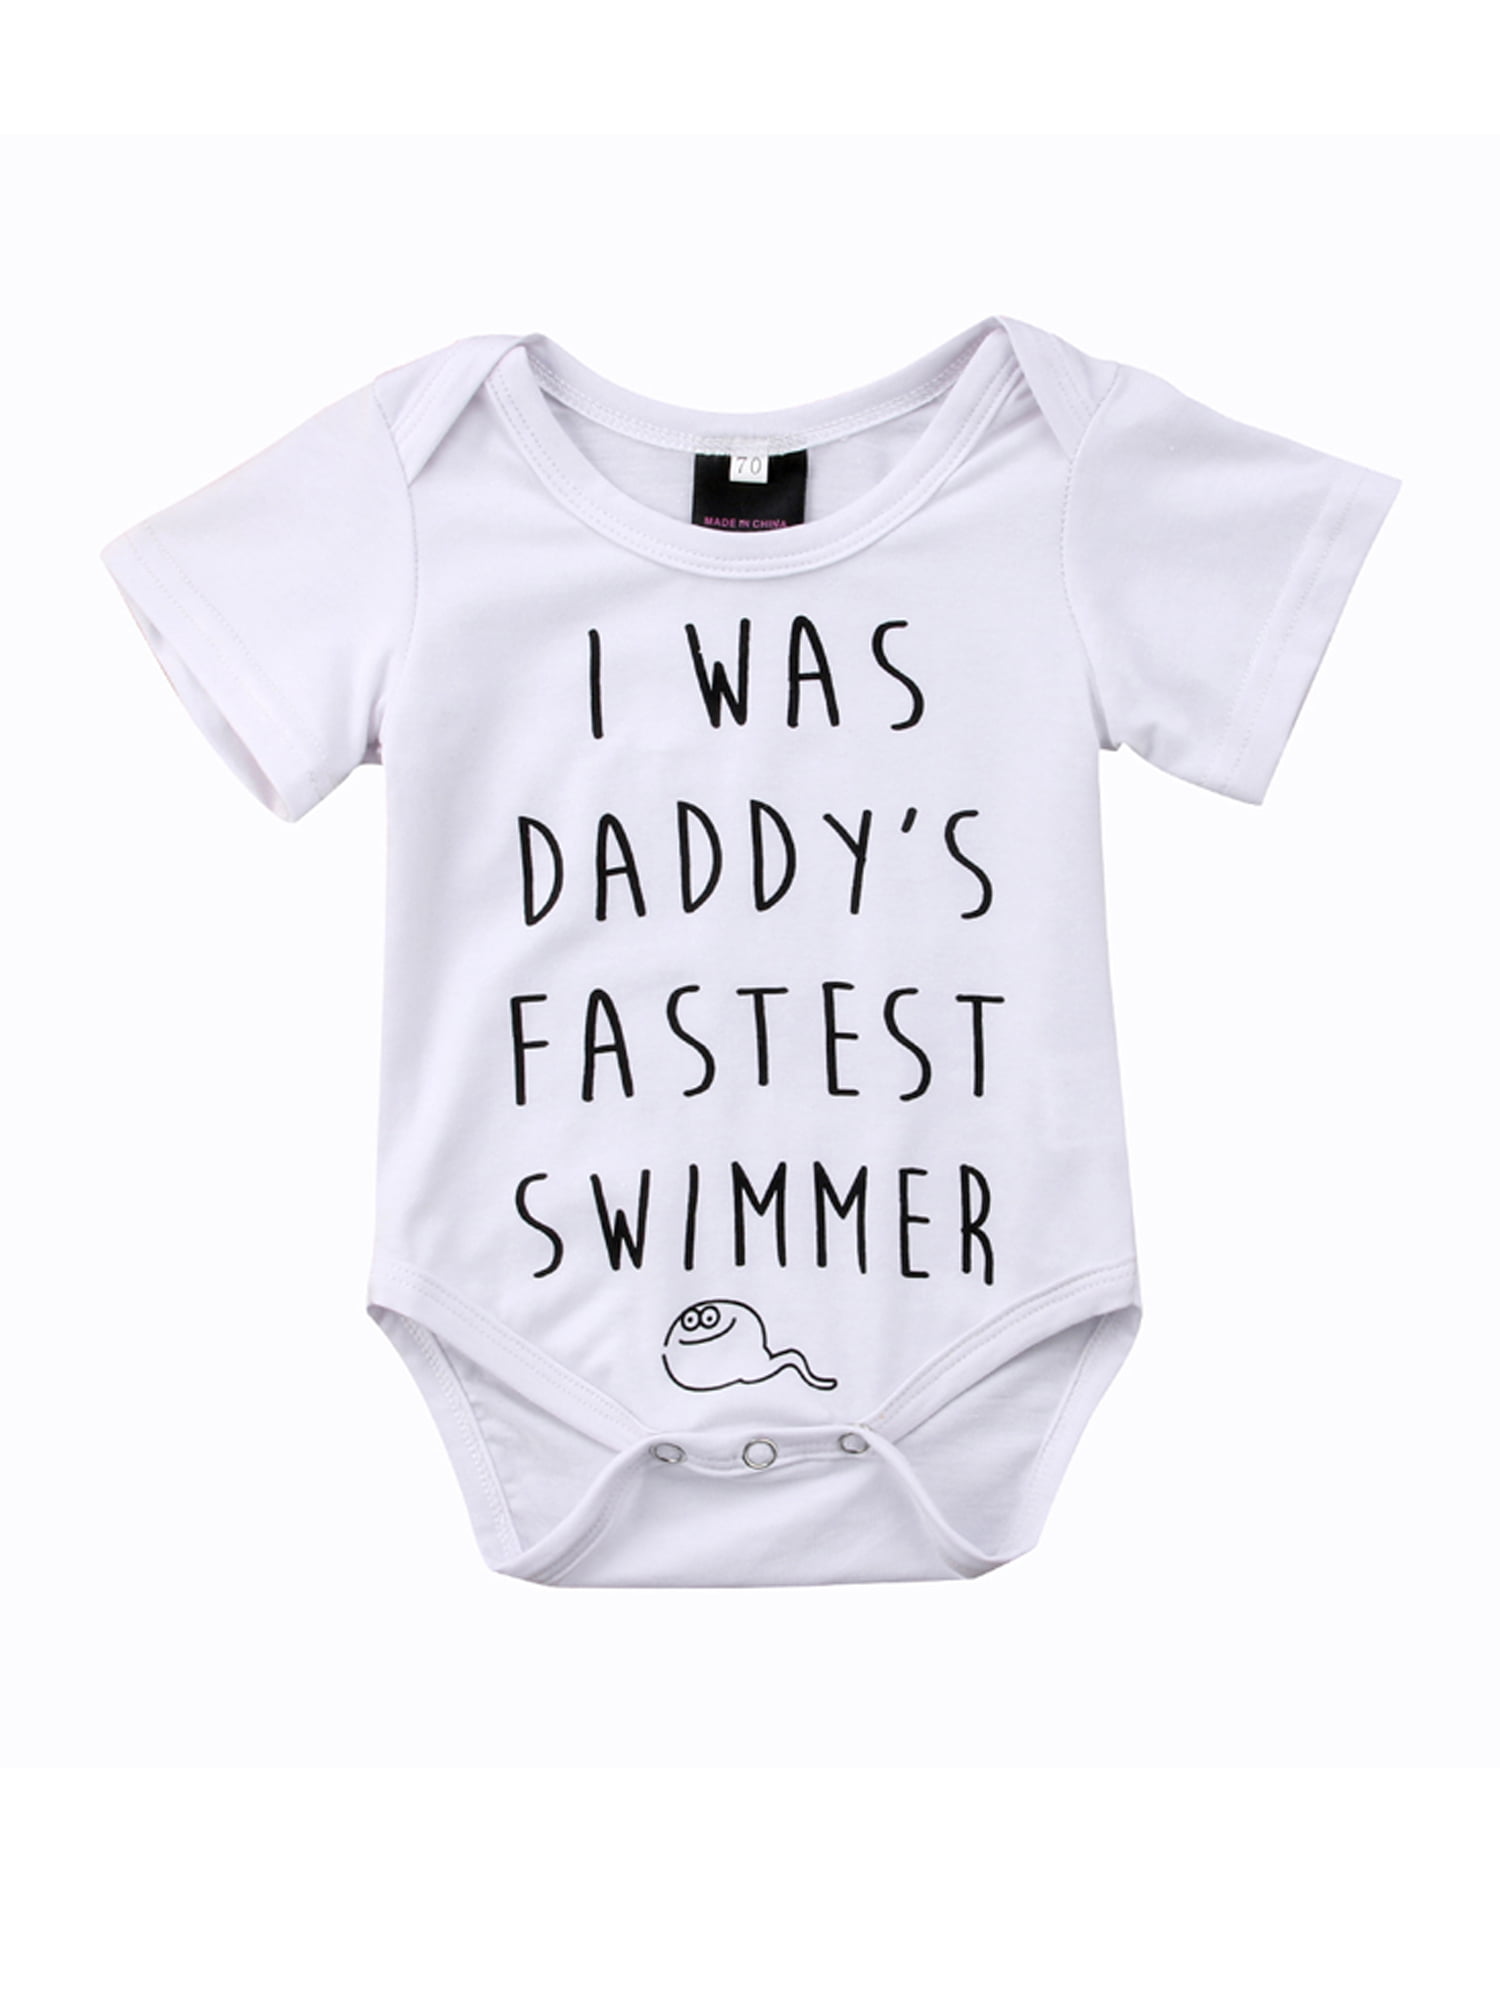 New Cute Newborn girl boy clothes Baby clothes Infant Girls Boys Romper Clothes 